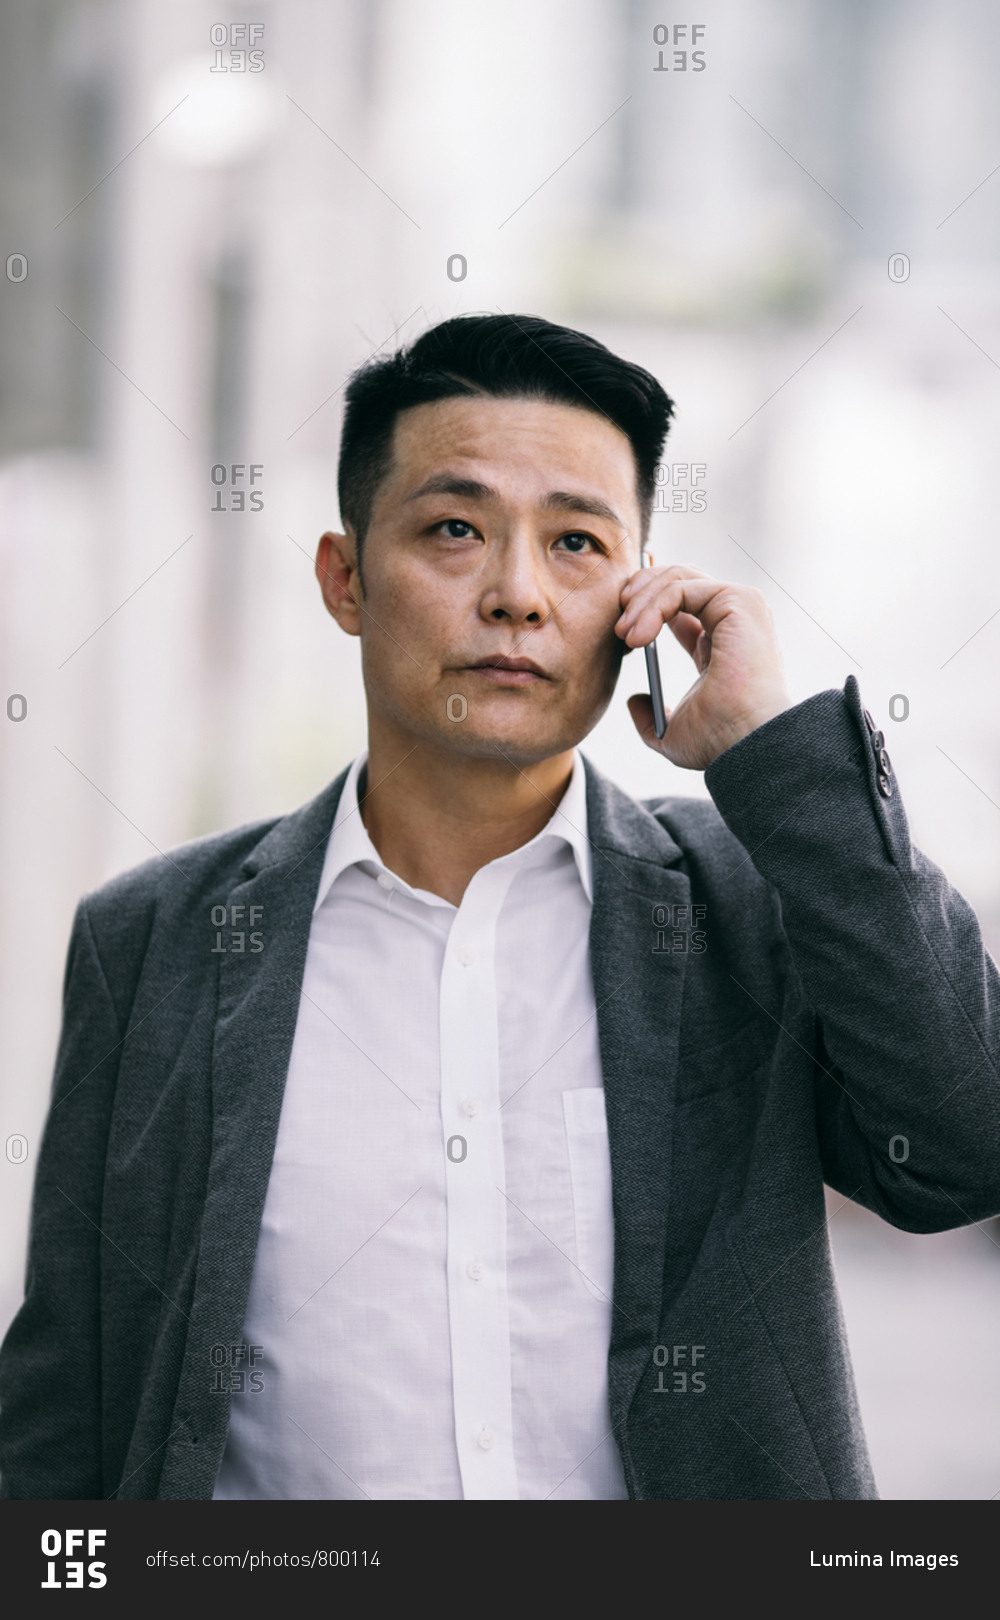 Portrait Smart Looking Asian Middle Aged Stock Photo 1435646918